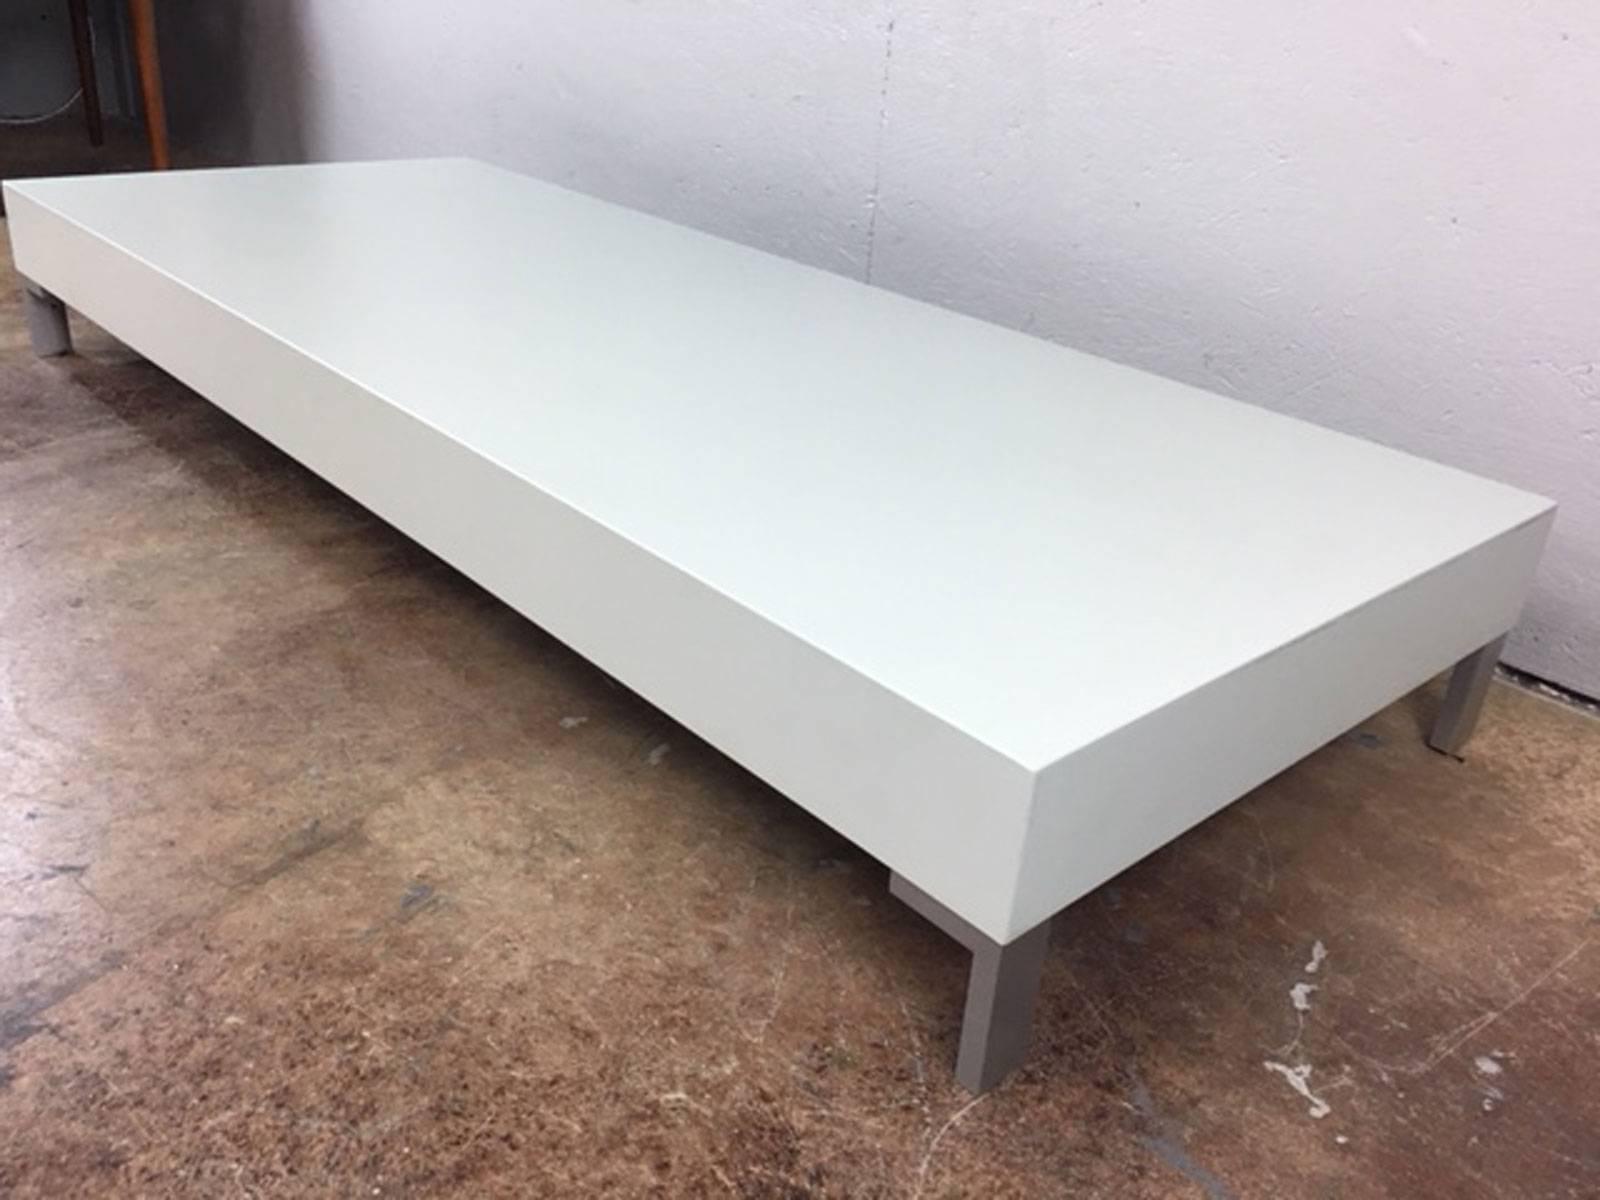 Very well built low coffee table or art or sculpture display table. Believed to be B&B Italia. The color of this table is fairly represented in the photos. It is a very pale, very slight and faint hint of mint color. This table is heavy and